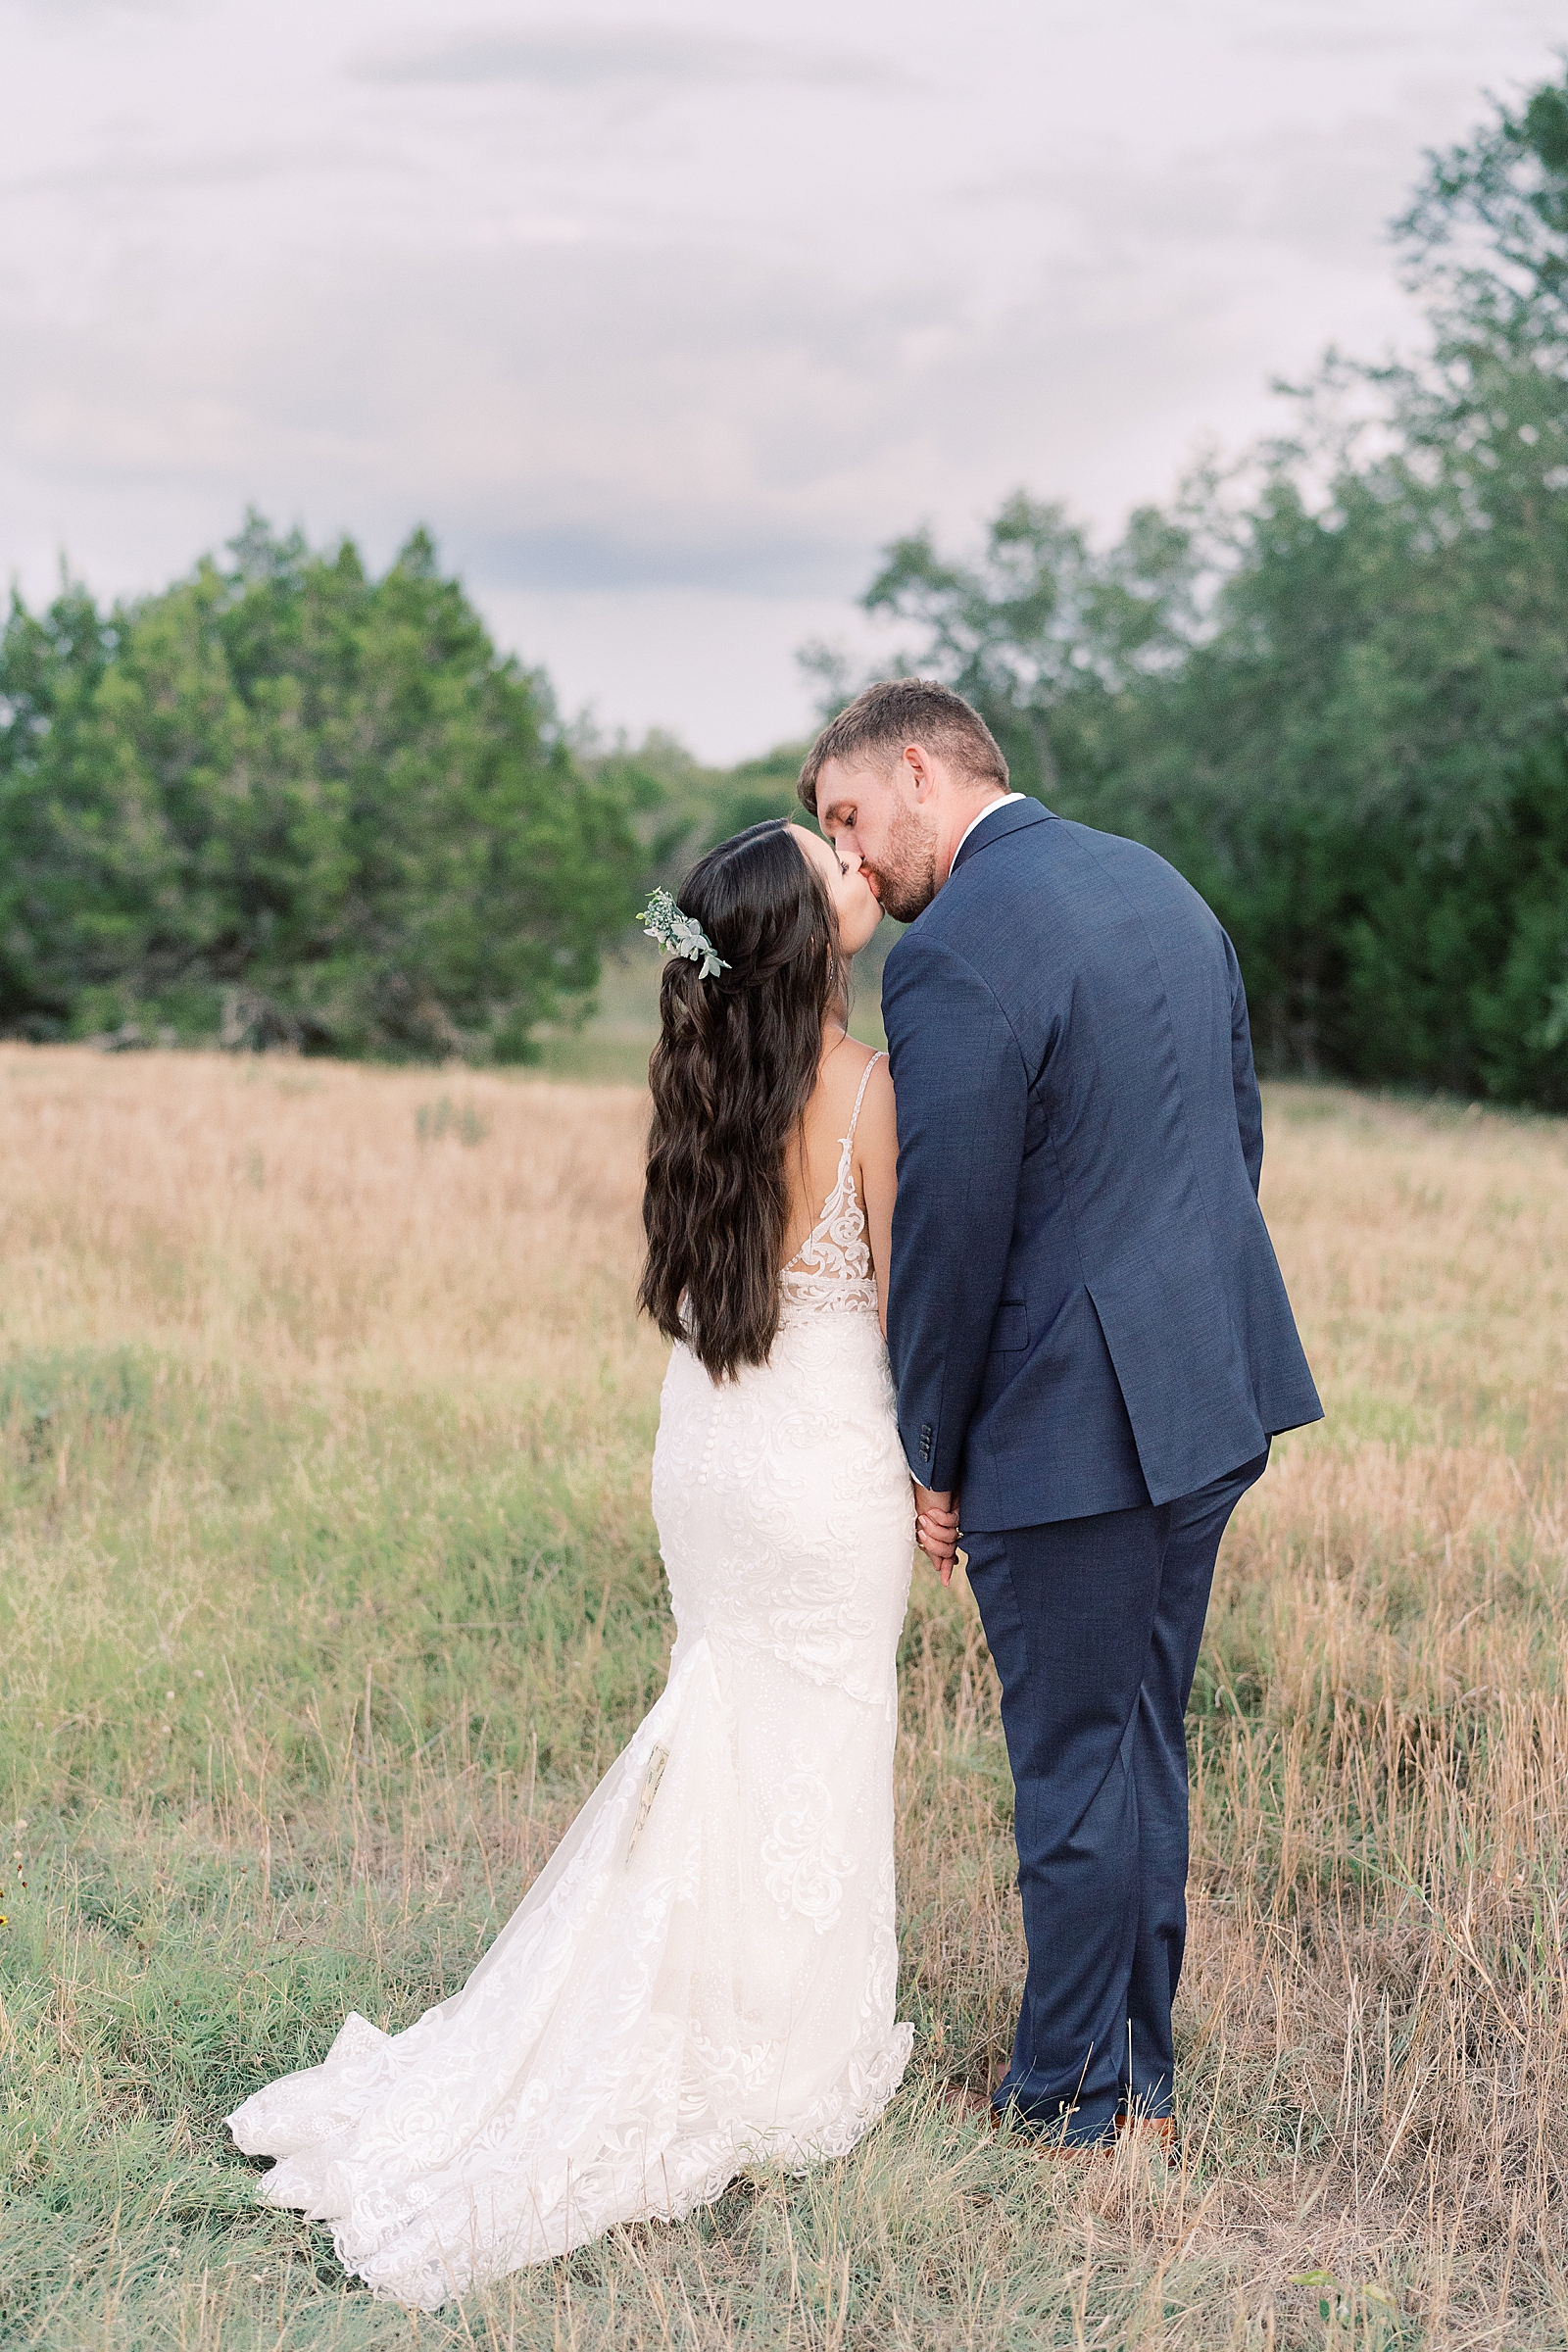 This navy, light gray, with pops of burgundy wedding day is some serious color palette inspo! In Dripping Springs, Texas at Saddle Creek Weddings, this day was full of elegance, fun and thoughtful details. Click through to see all the pretty! #weddingdayinspiration #dustybluewedding #austintexaswedding #hillcountrywedding 